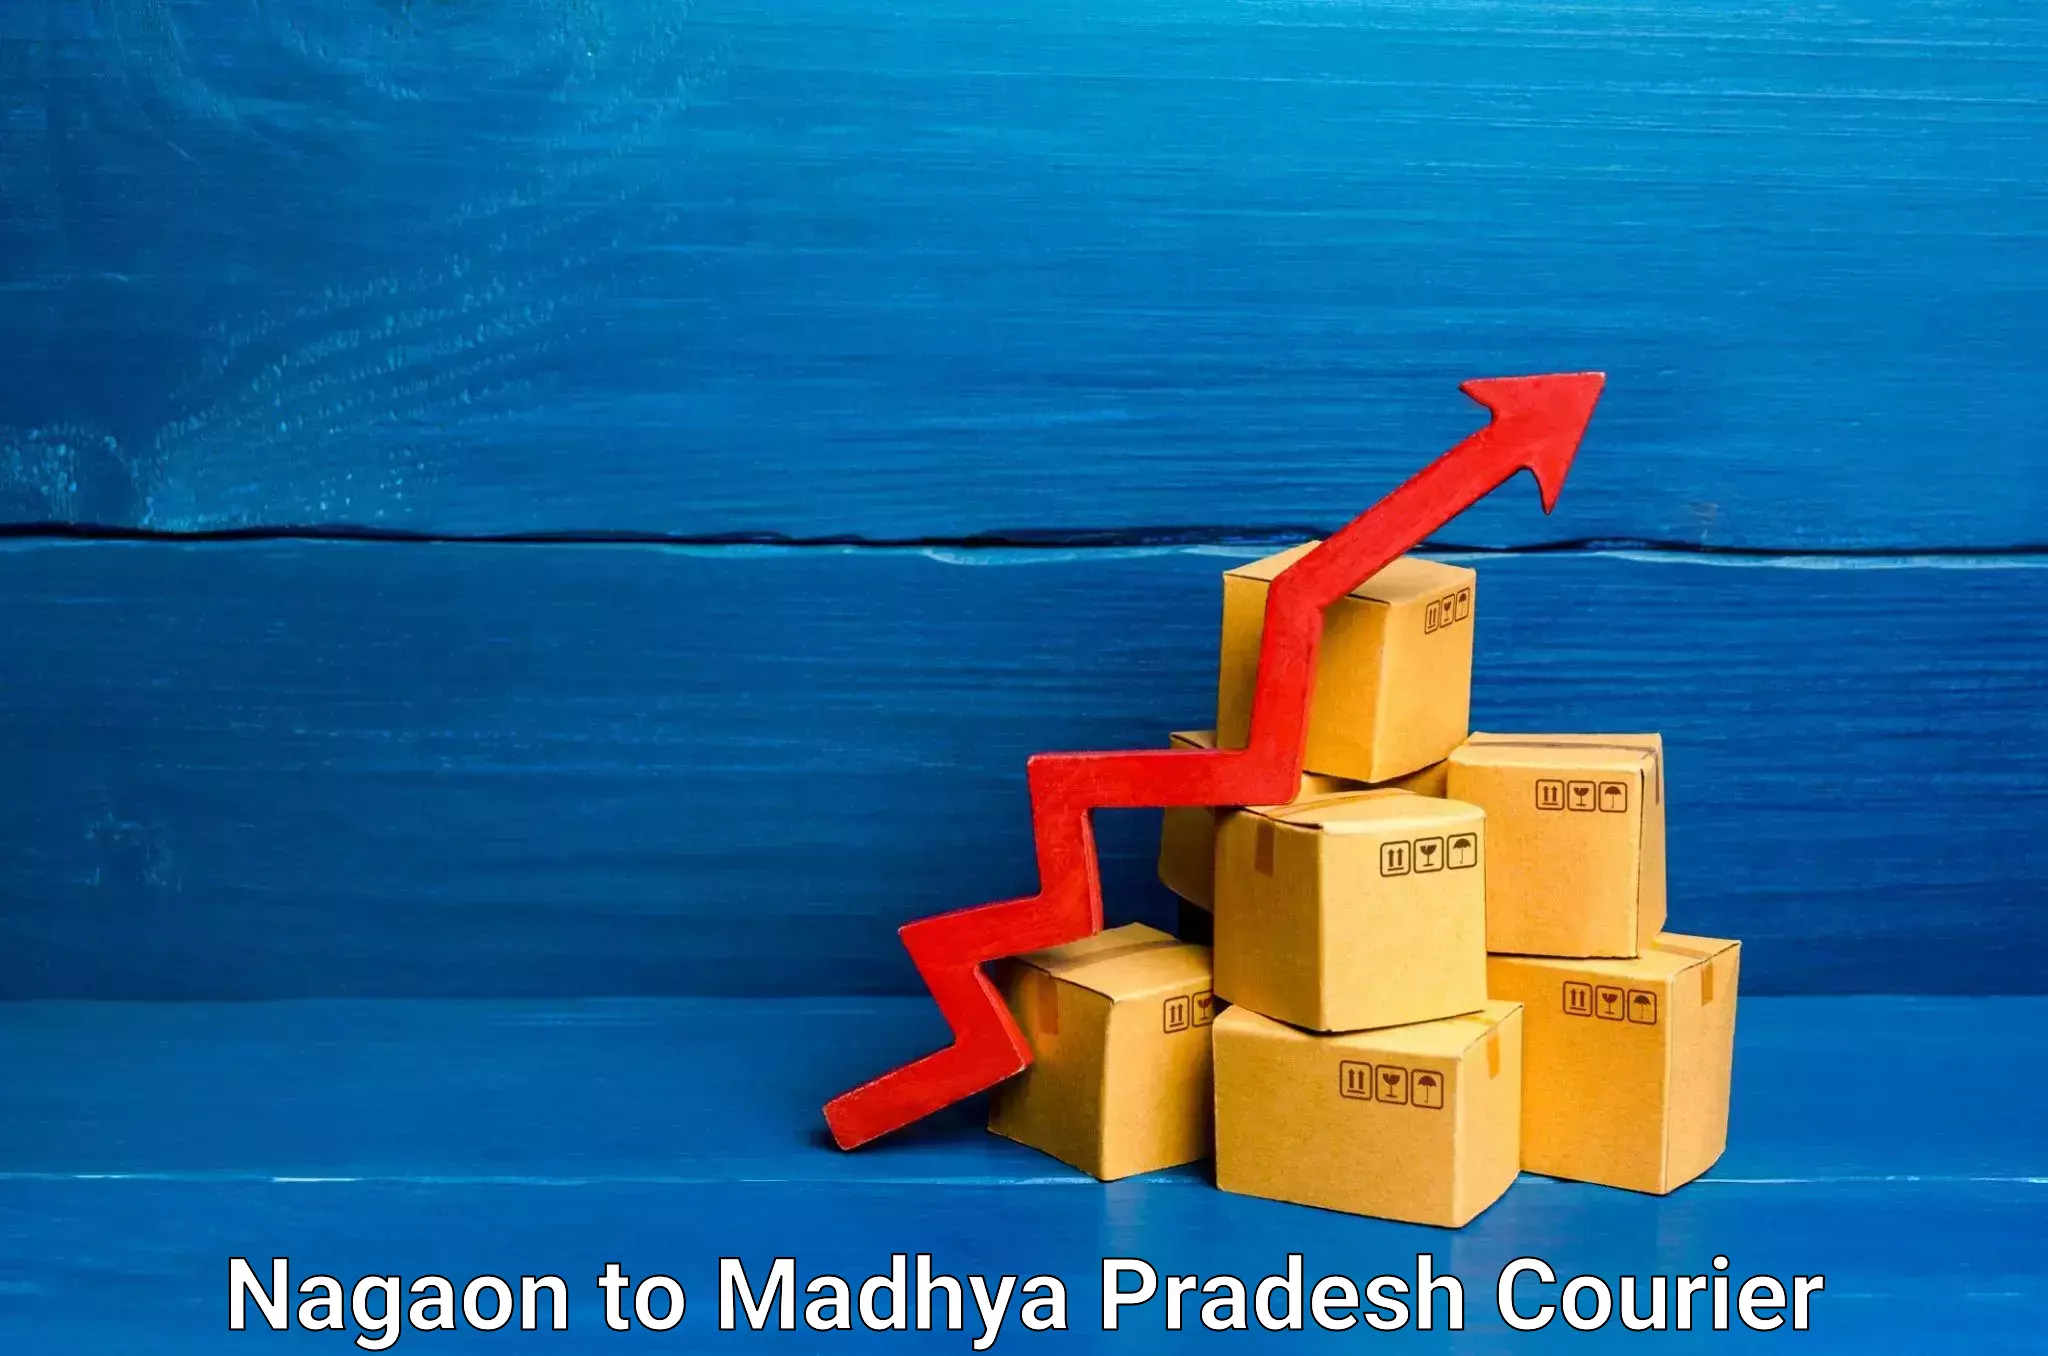 Express delivery network Nagaon to Neemuch